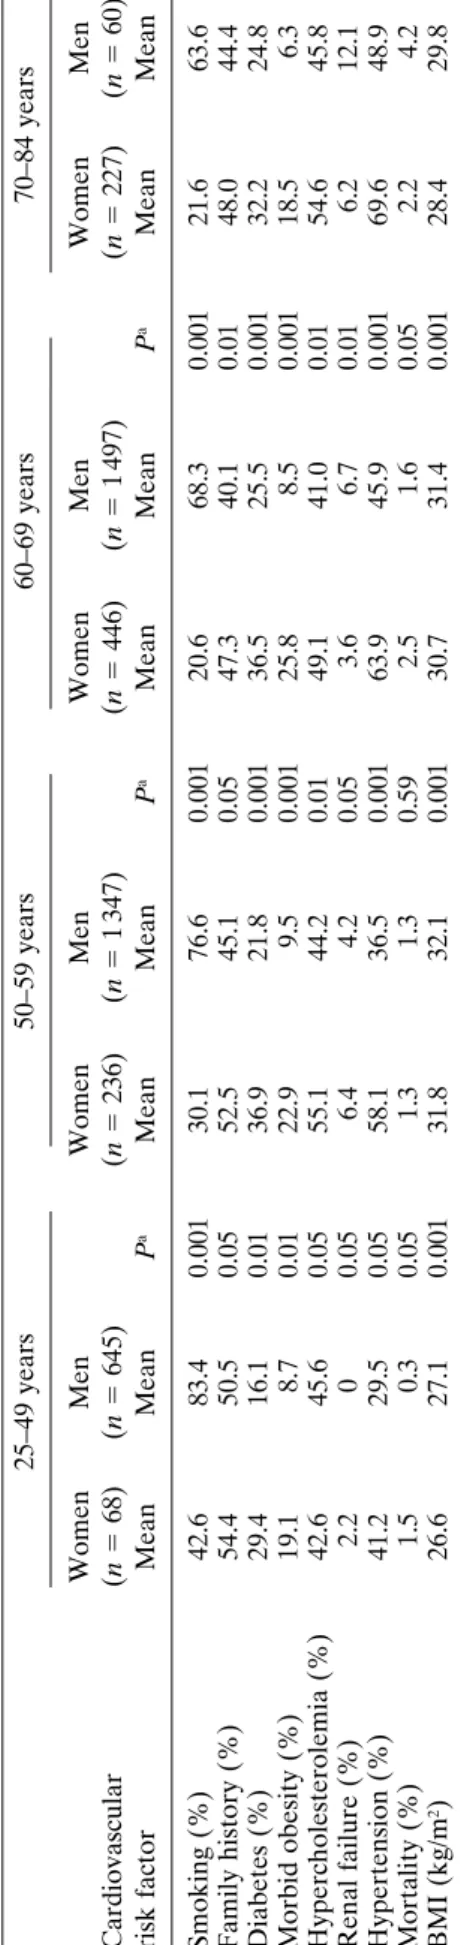 Table 4. Relationship between body mass index and gender,